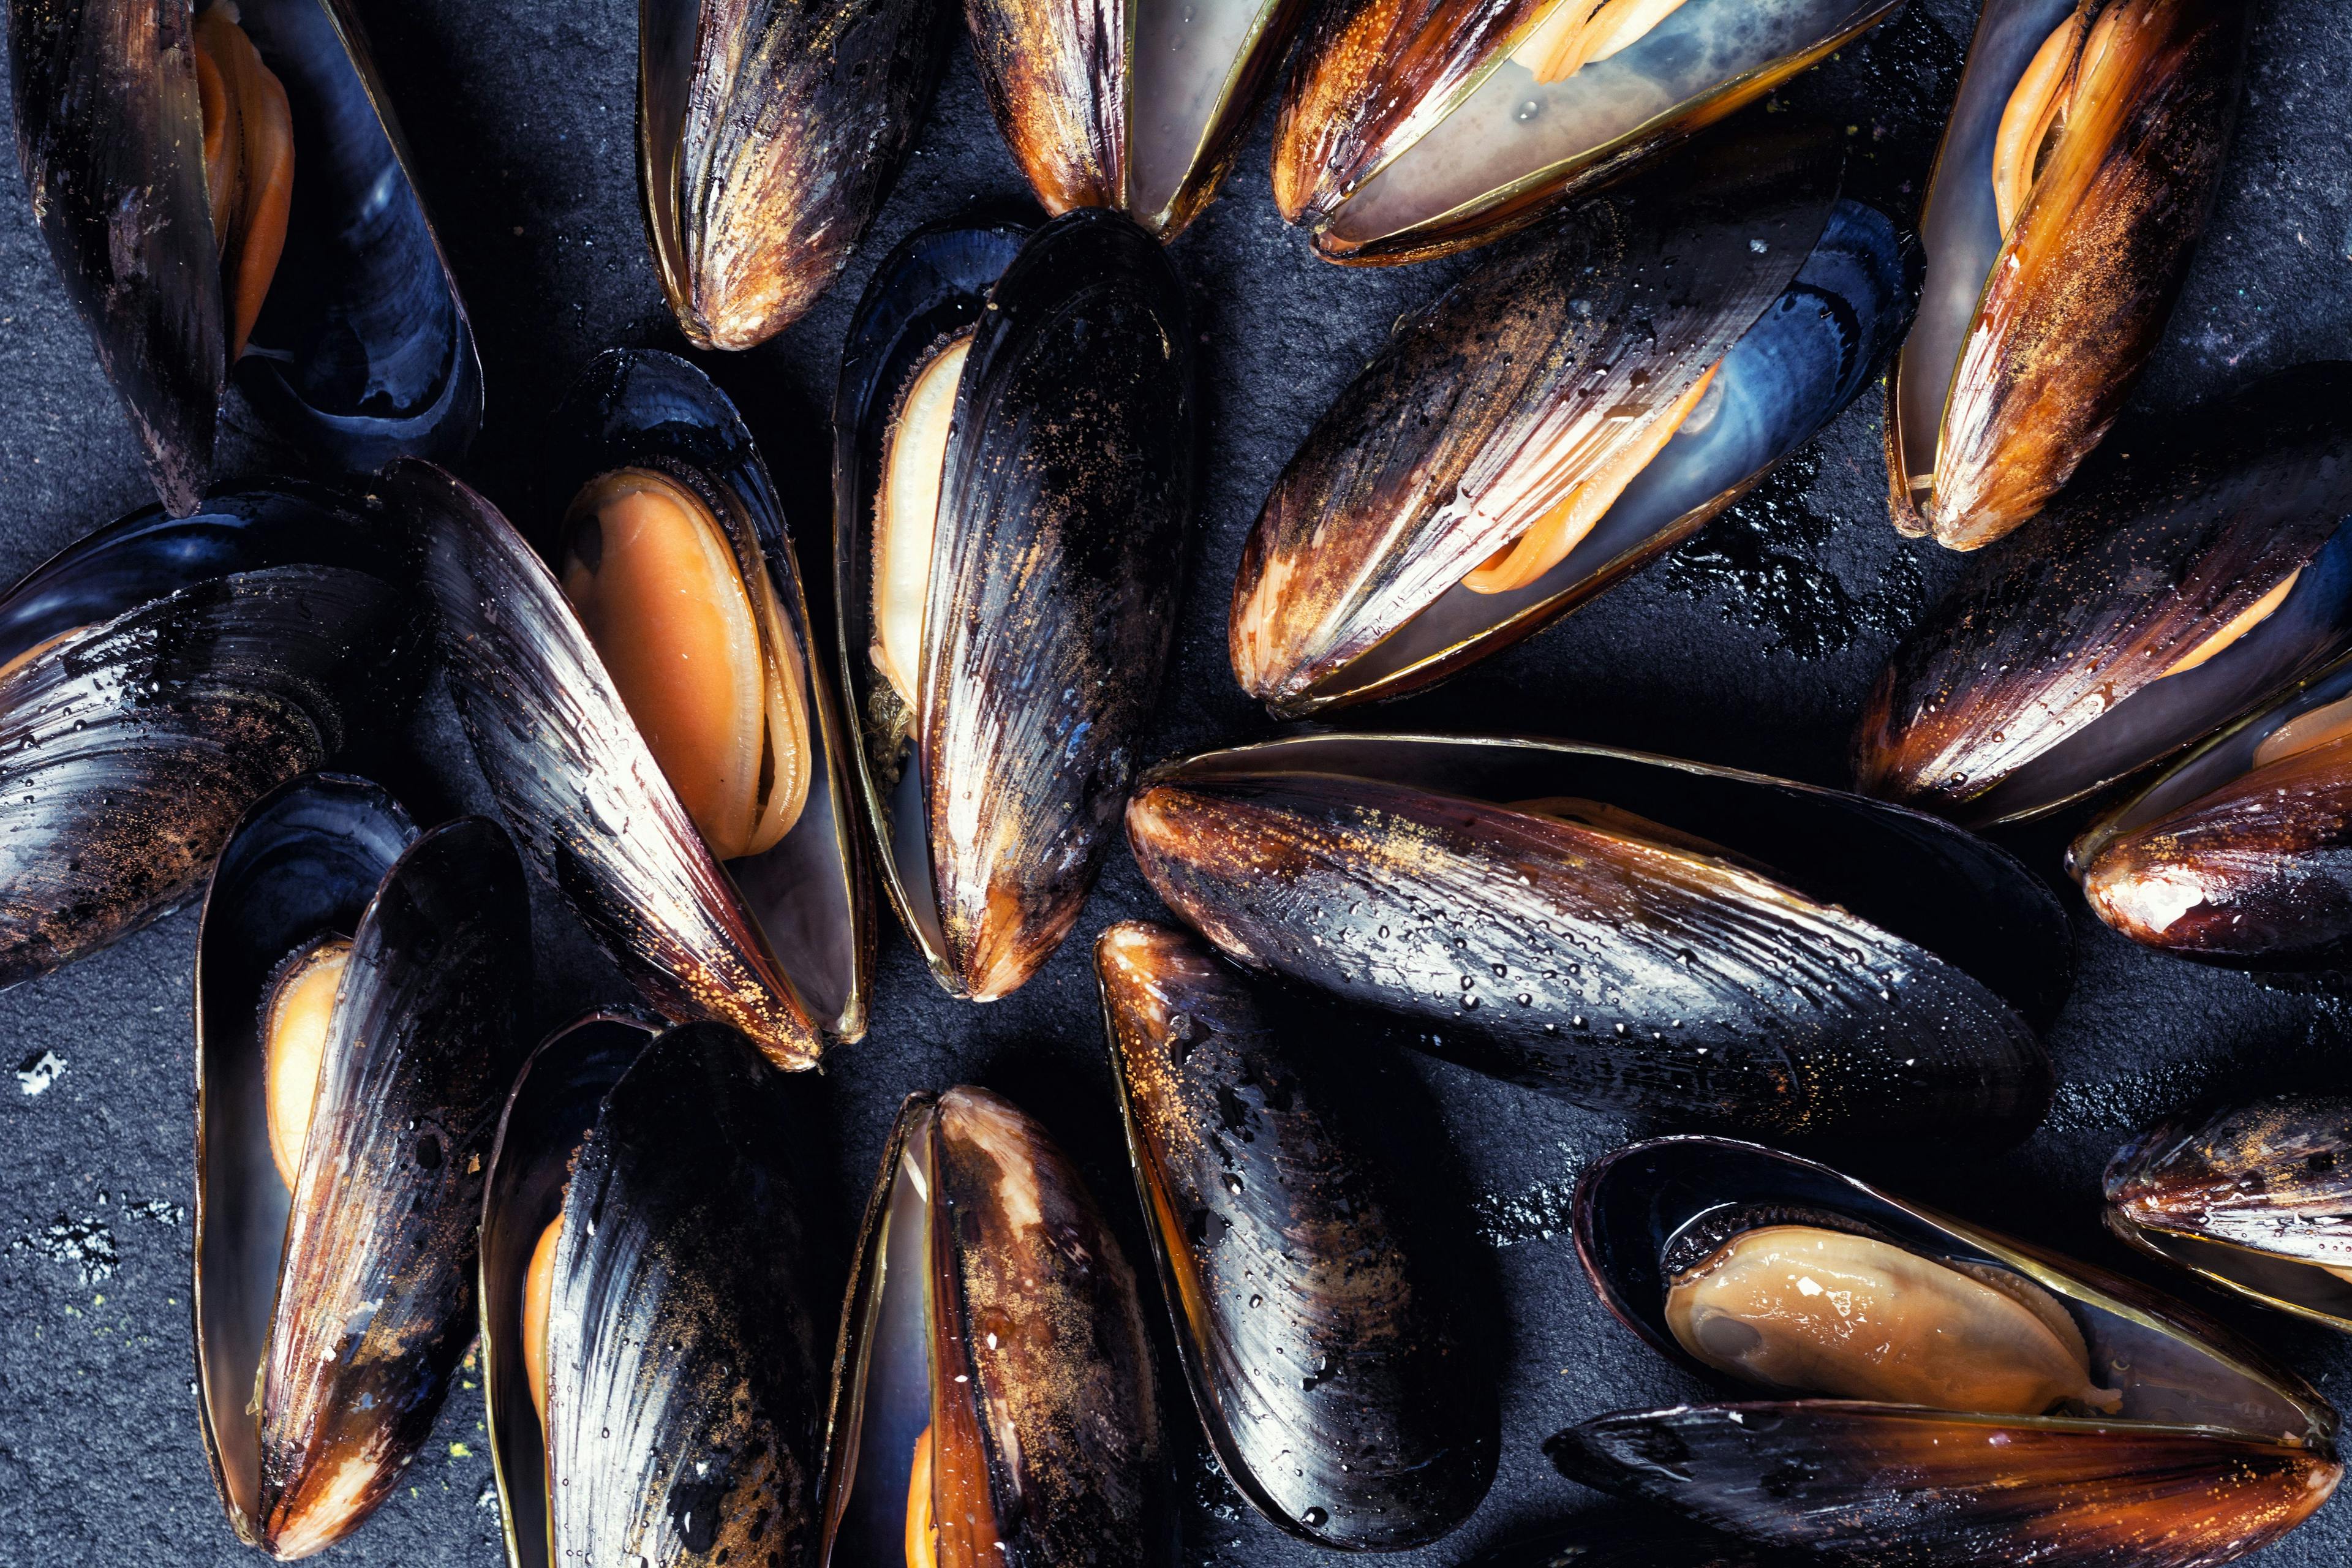 Texture of mussels | Image Credit: © whitestorm - stock.adobe.com